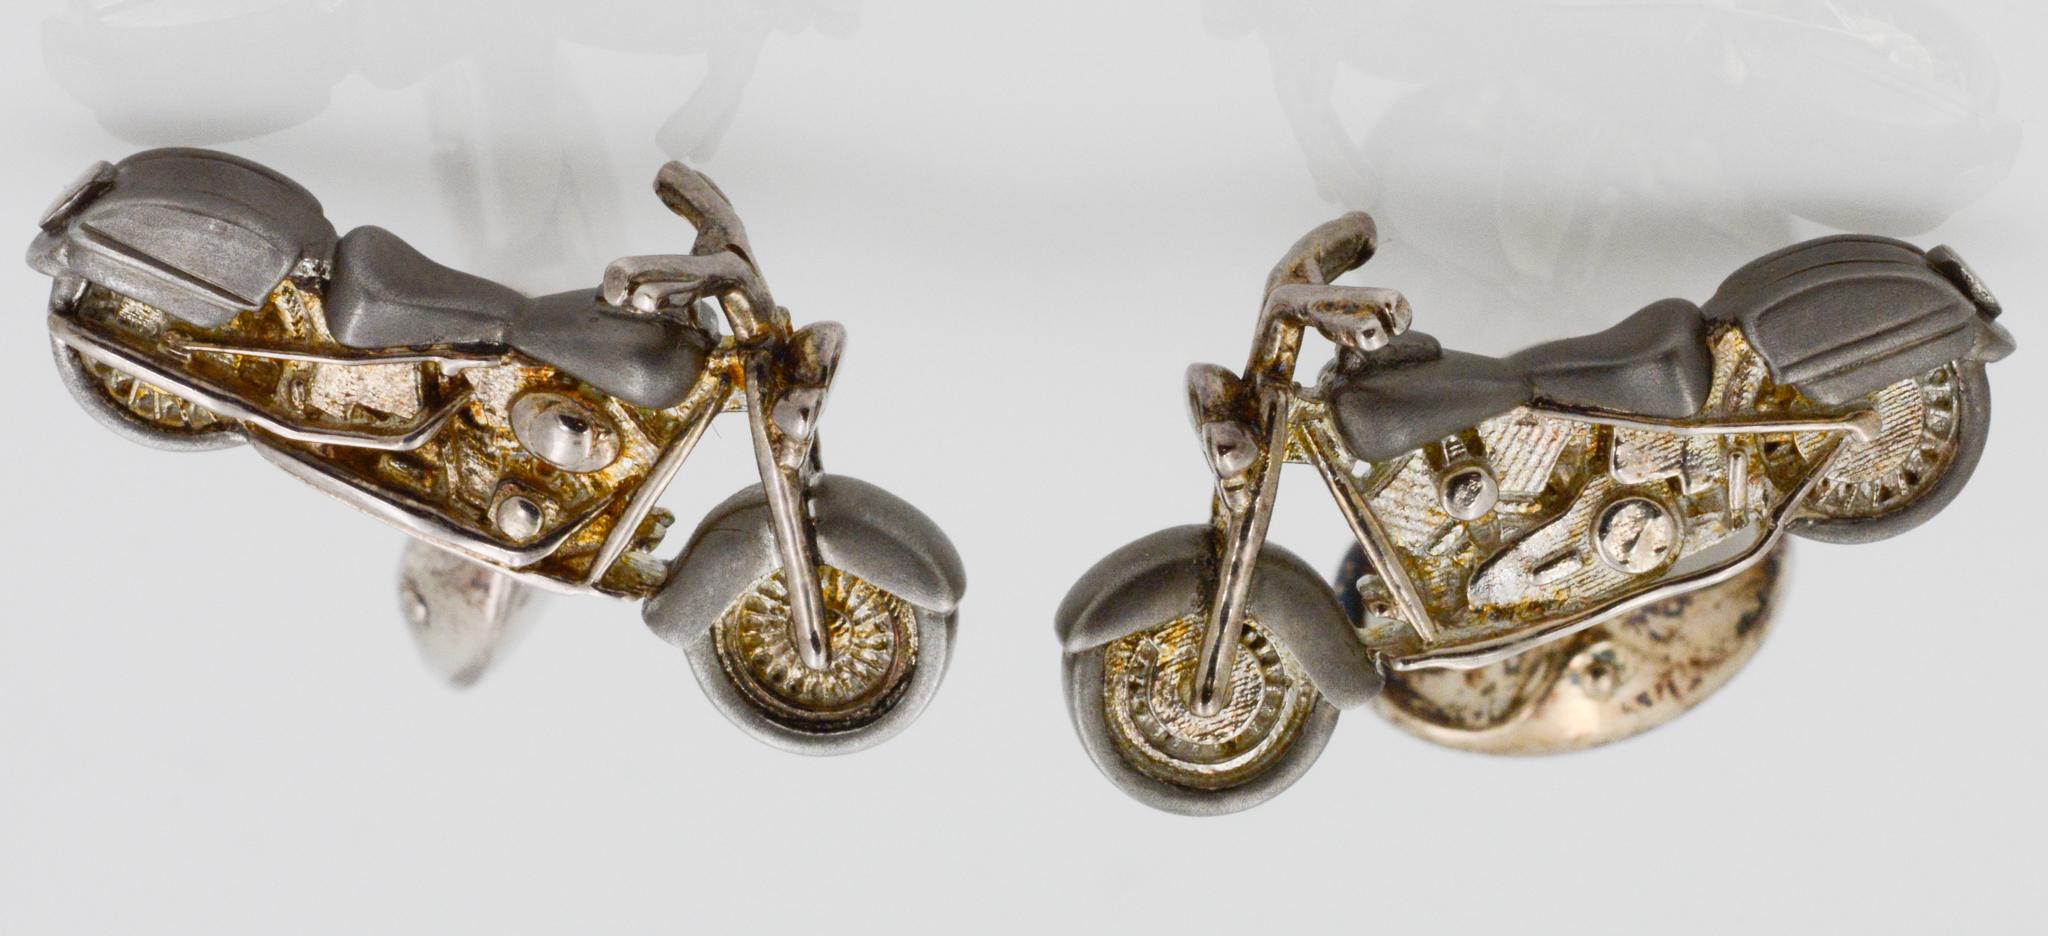 These sterling silver motorbike cufflinks have a small dome oval spring link. The cufflinks showcase the intricate details of the bike, including the motor, wheels, and seats. 
